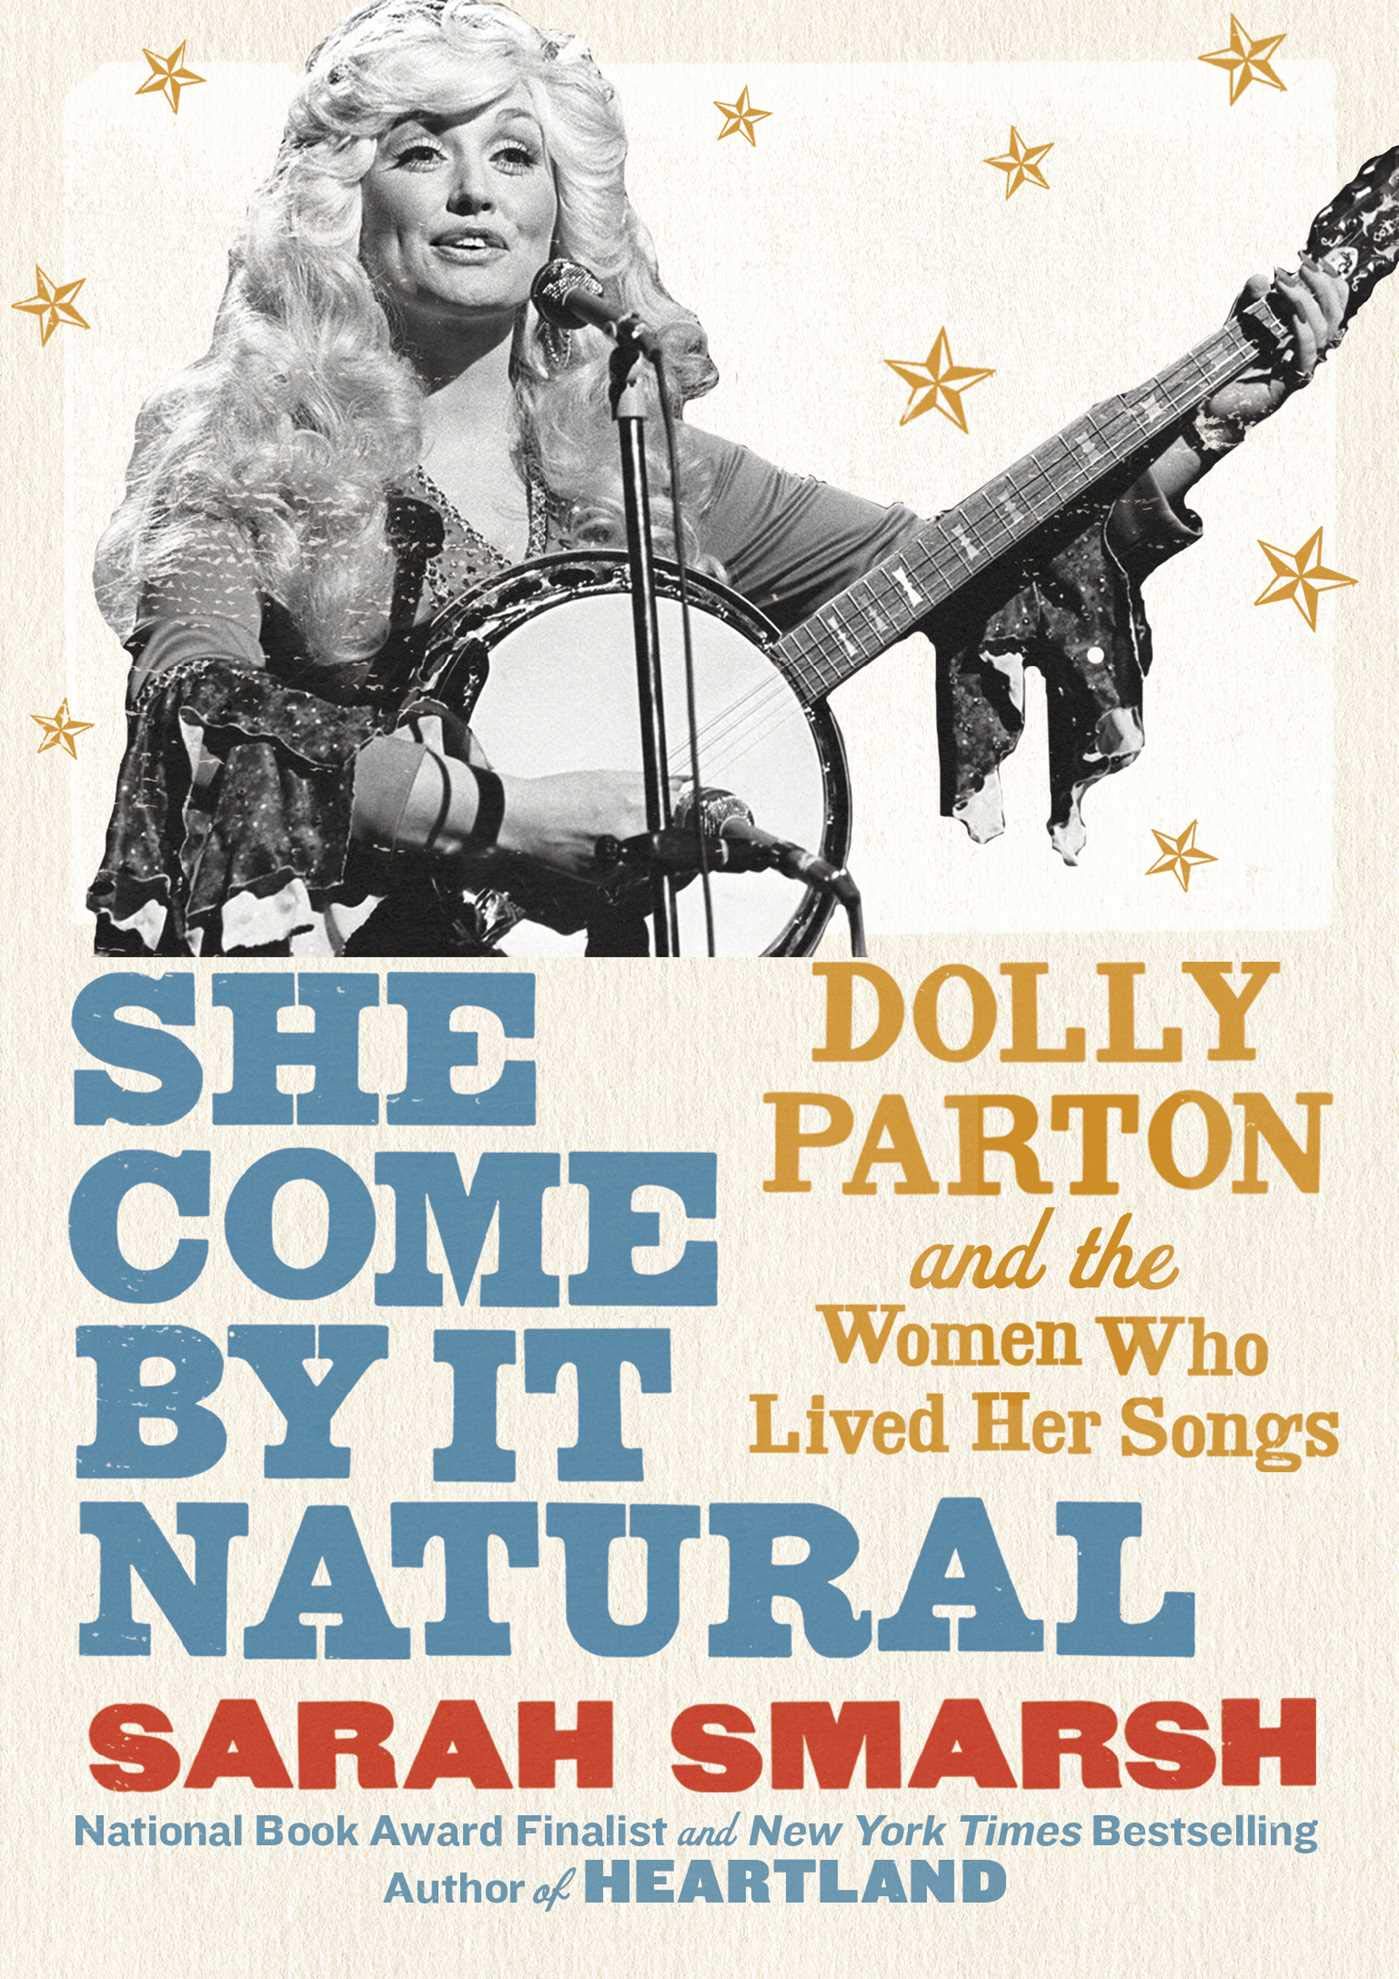 The cover of She Come By It Natural: Dolly Parton and the Women Who Lived Her Songs